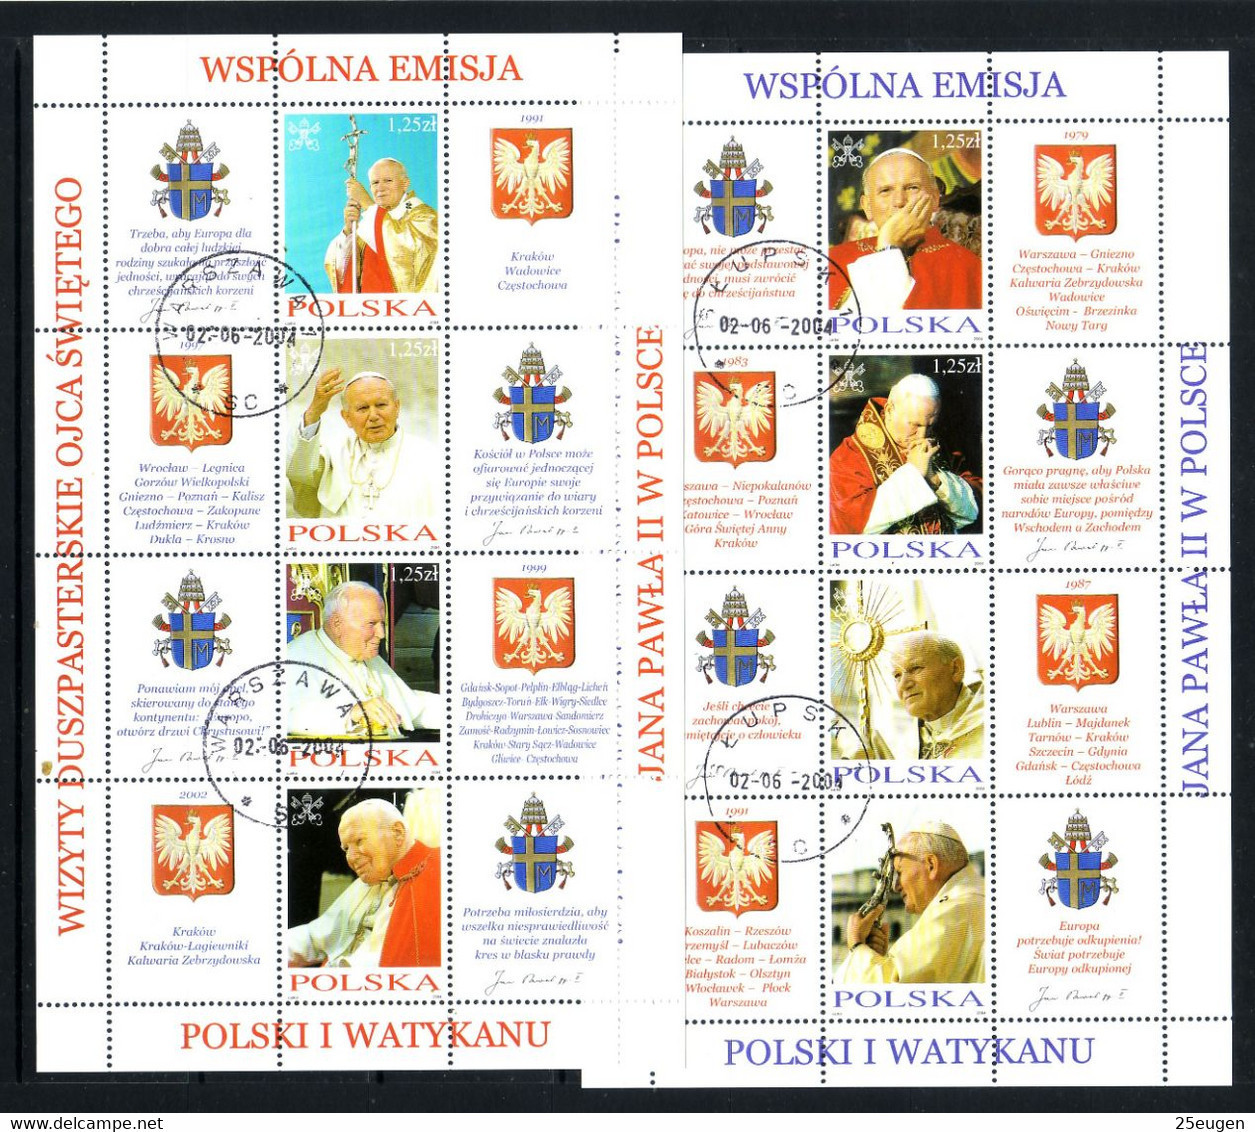 POLAND 2004 MICHEL NO 4109-4116 MS USED - Used Stamps